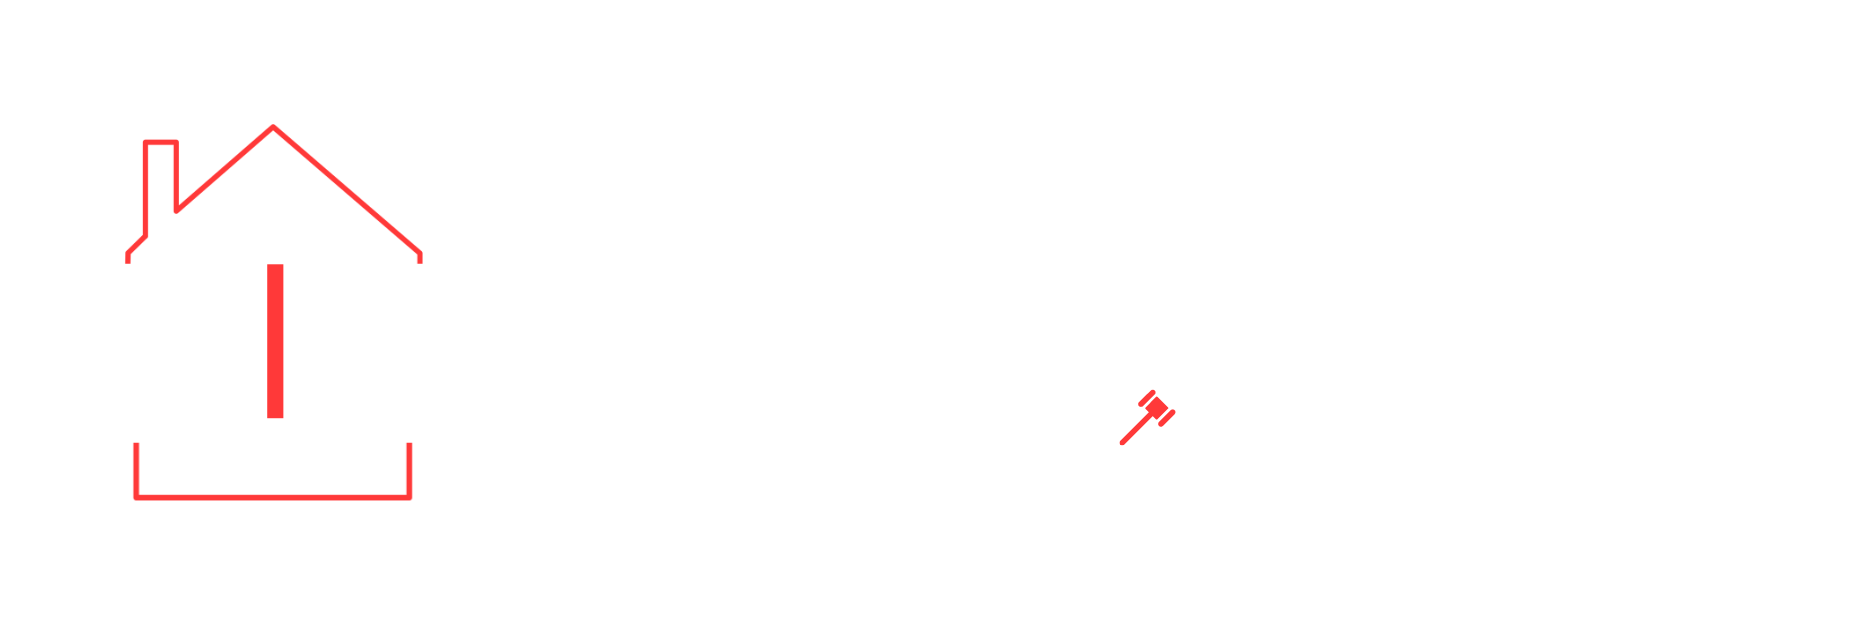 Gorrell Bros. Auctioneers & Real Estate